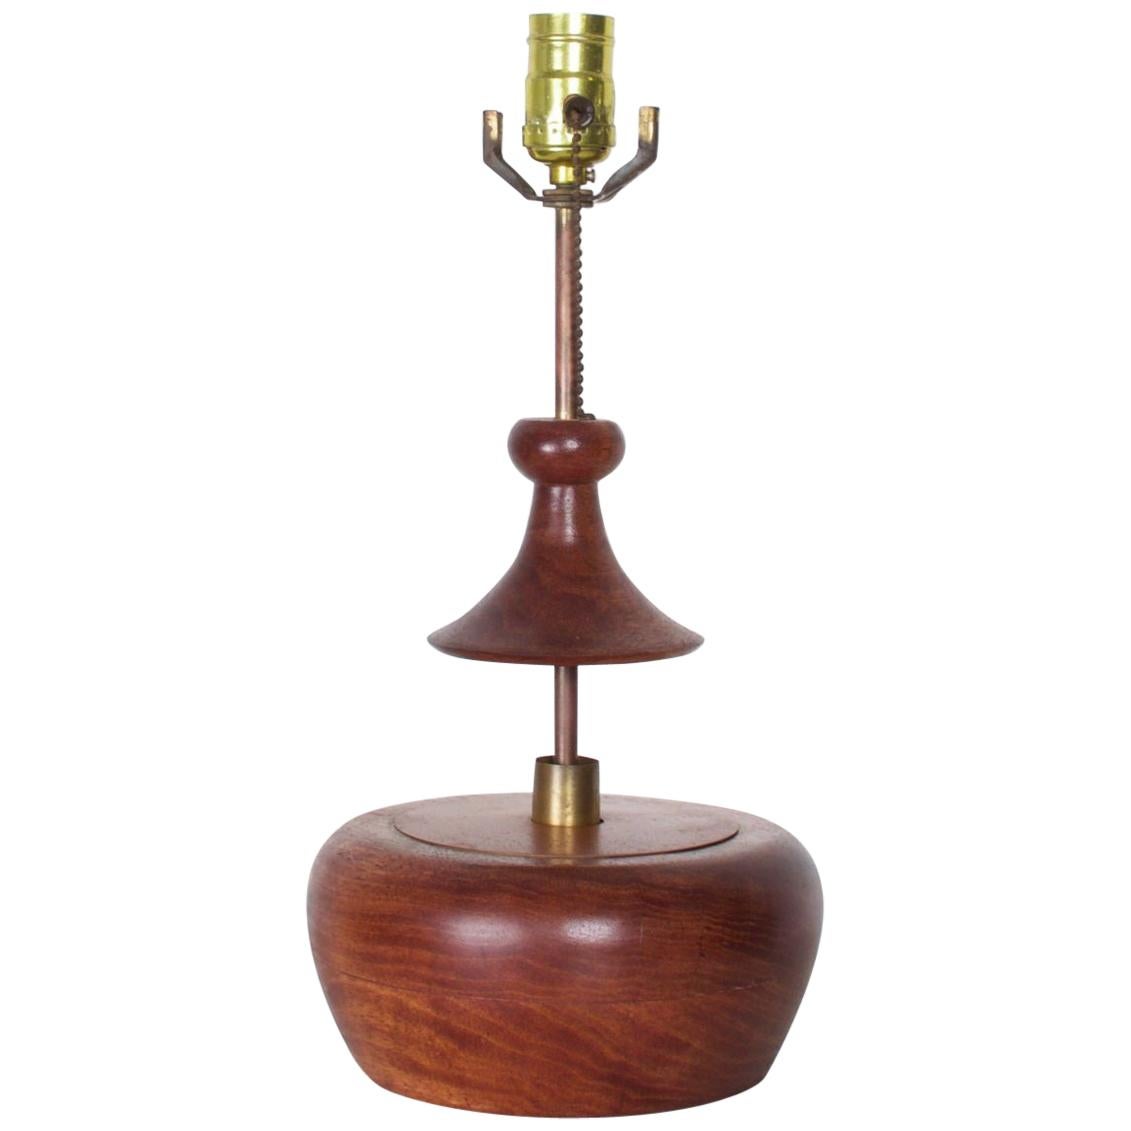 1950s Solid Walnut & Brass Table Lamp Sculptural Style Tony Paul, Westwood CA